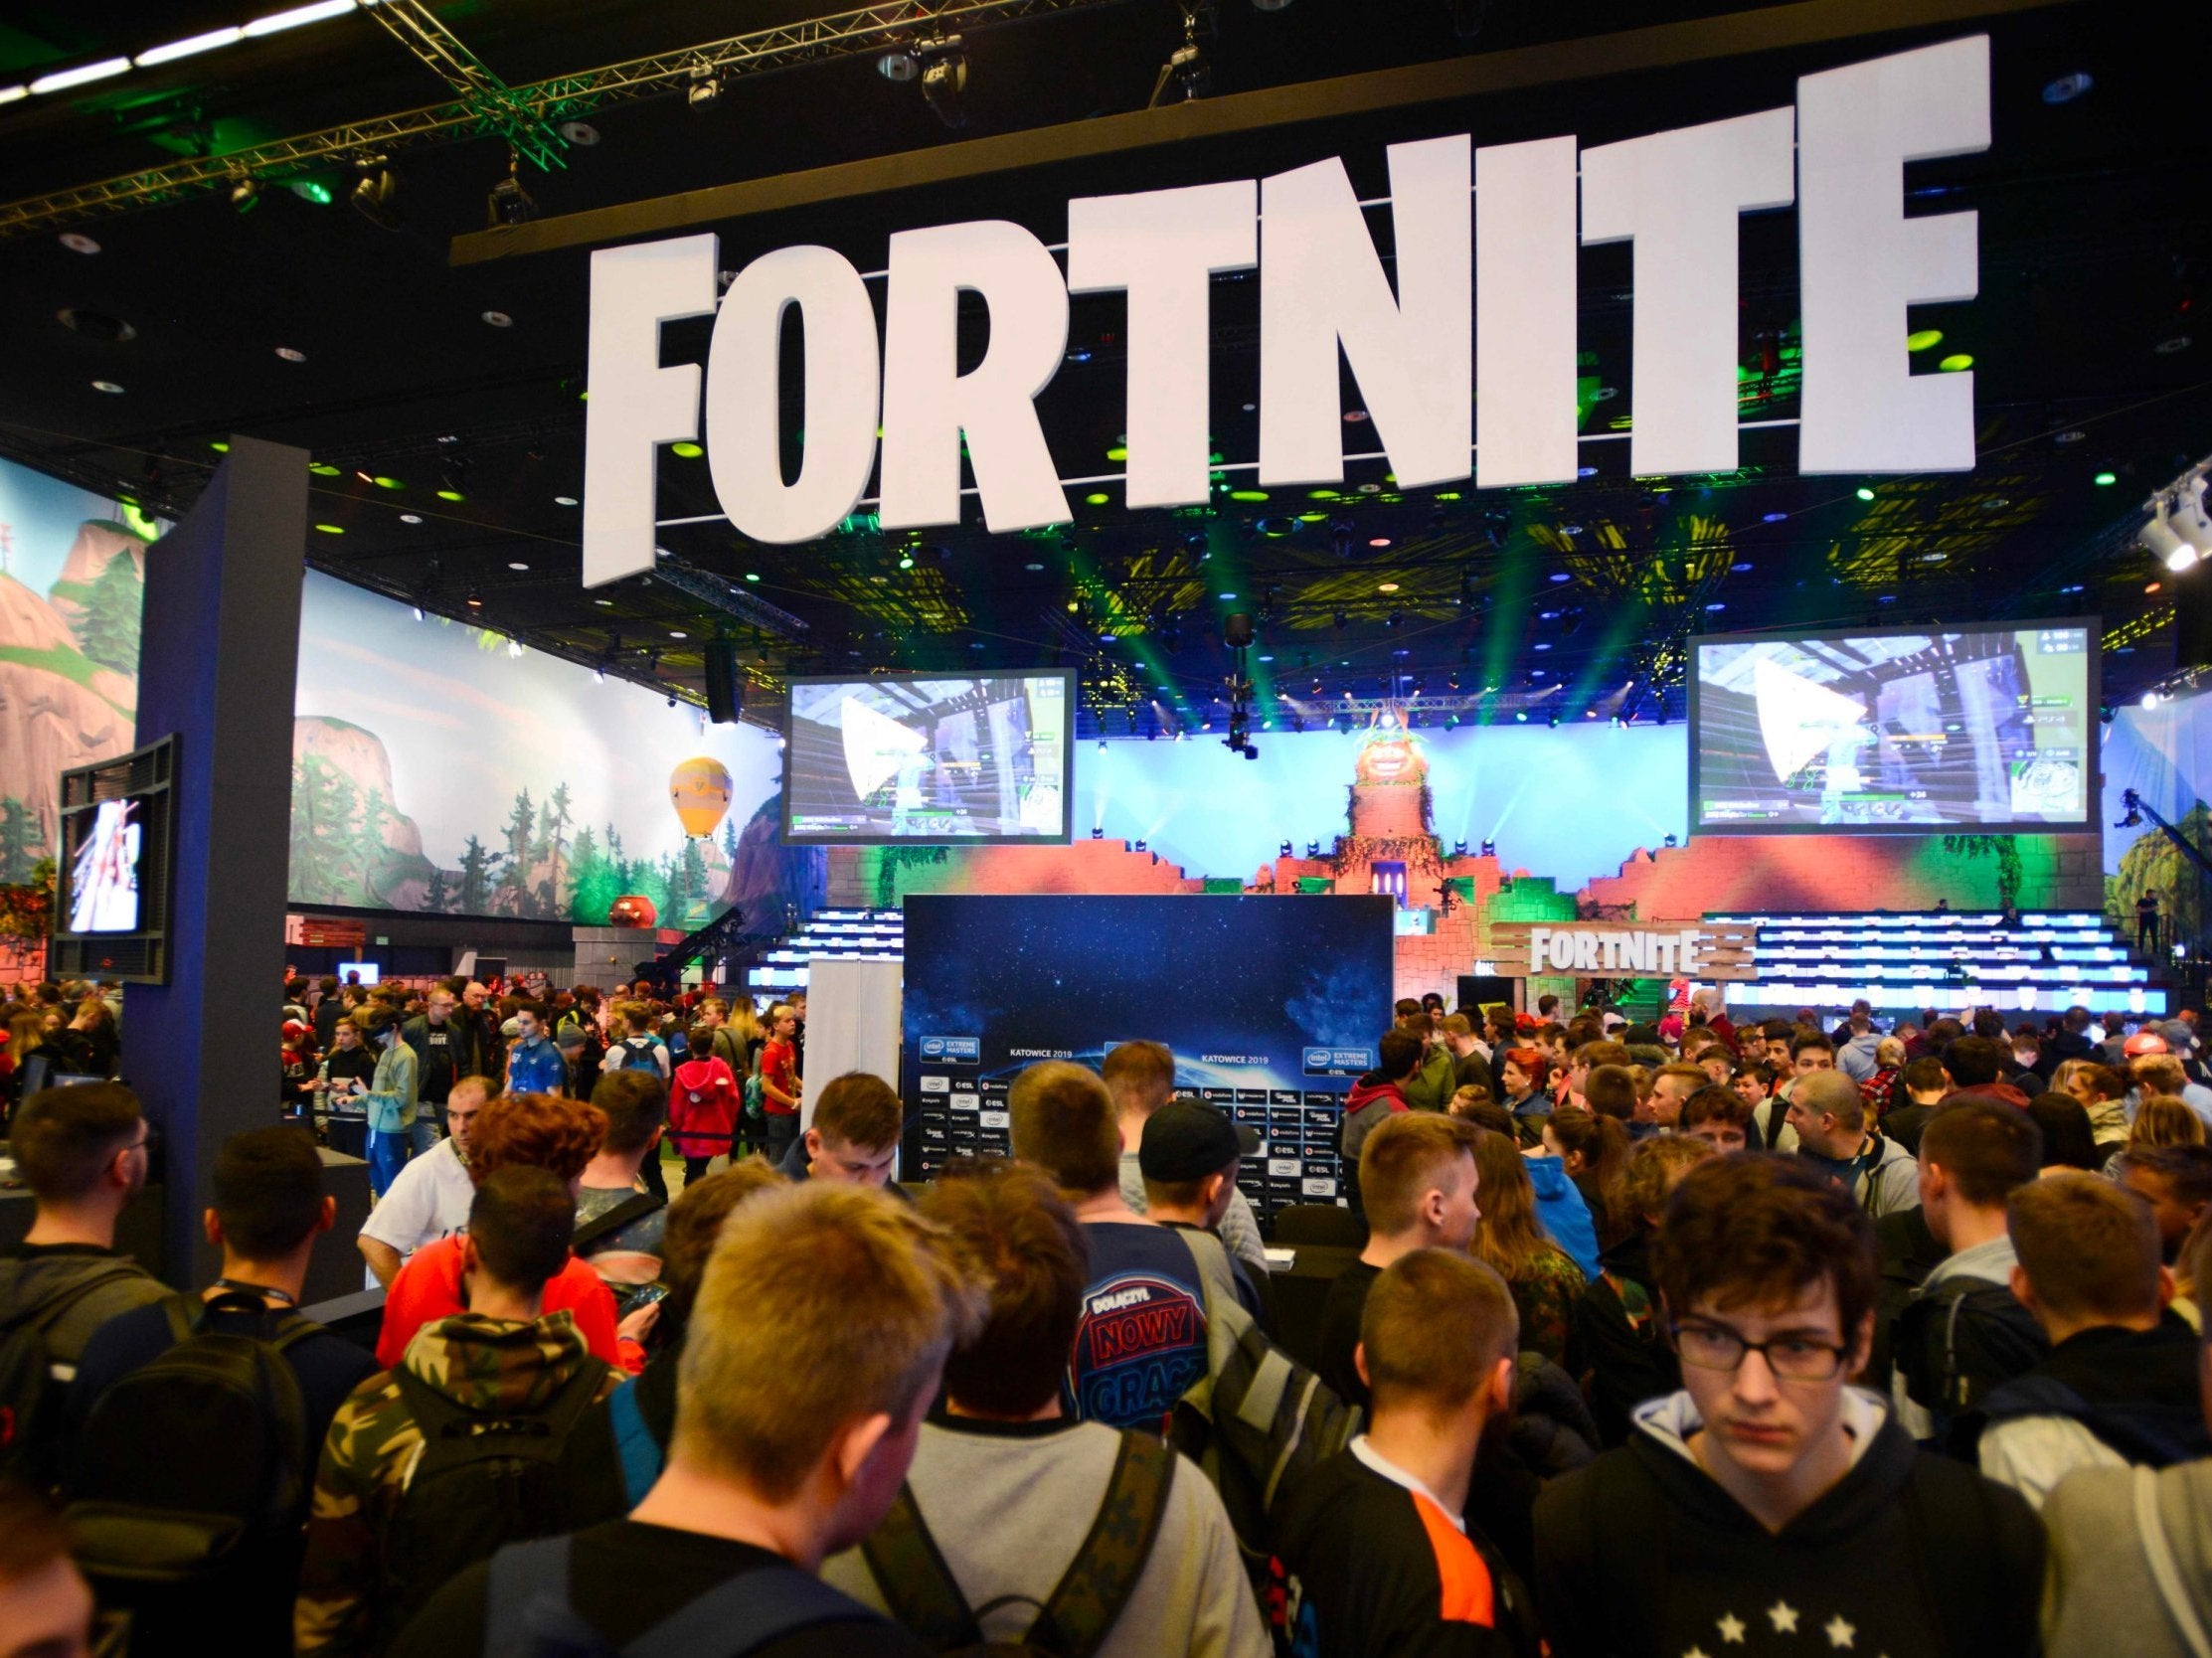 Fortnite Employees Work 100 Hour Weeks In Toxic Culture Of Fear To Keep Game A Success The Independent The Independent